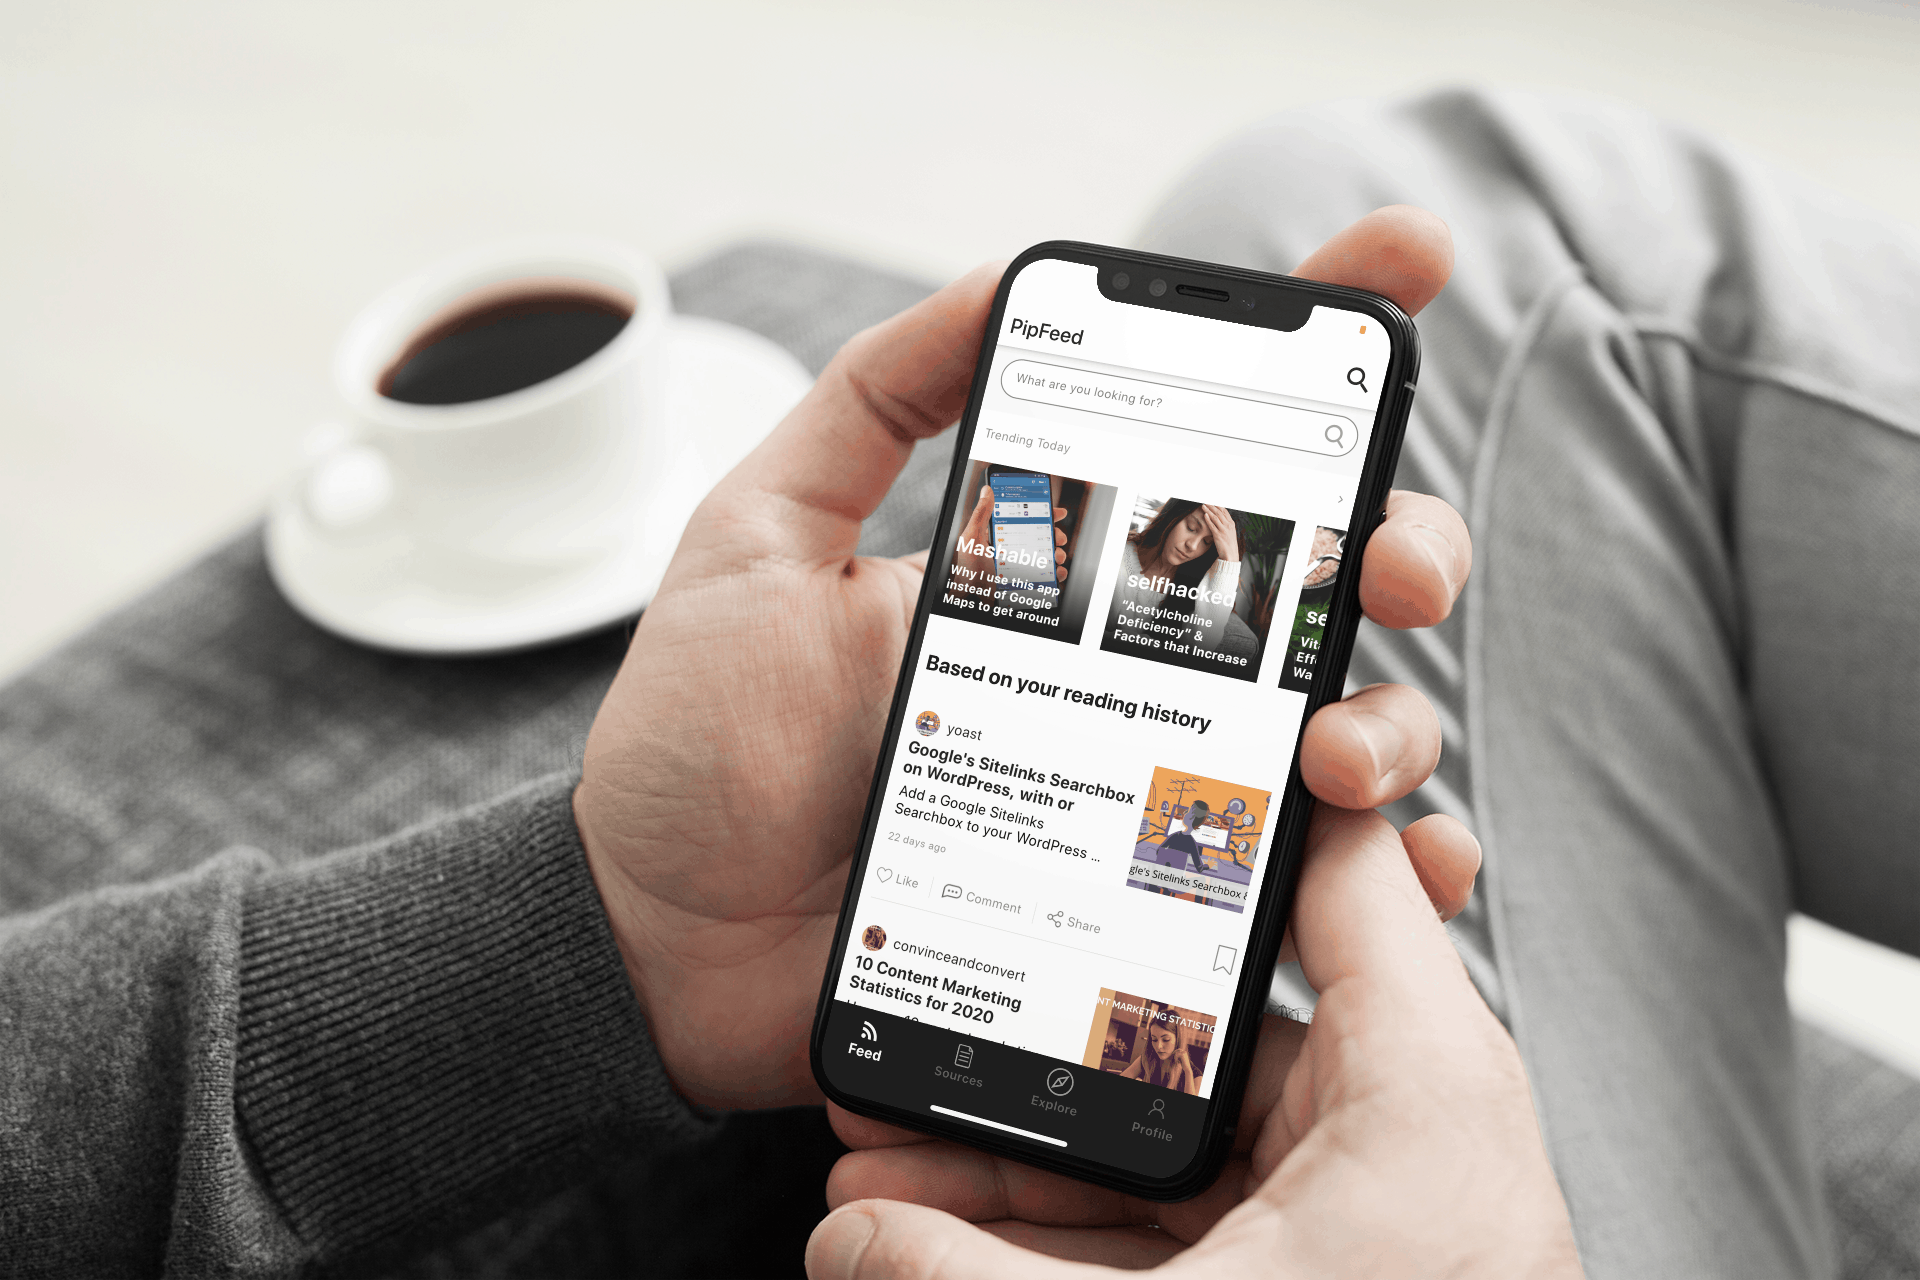 Pipfeed: Personalized article reading app